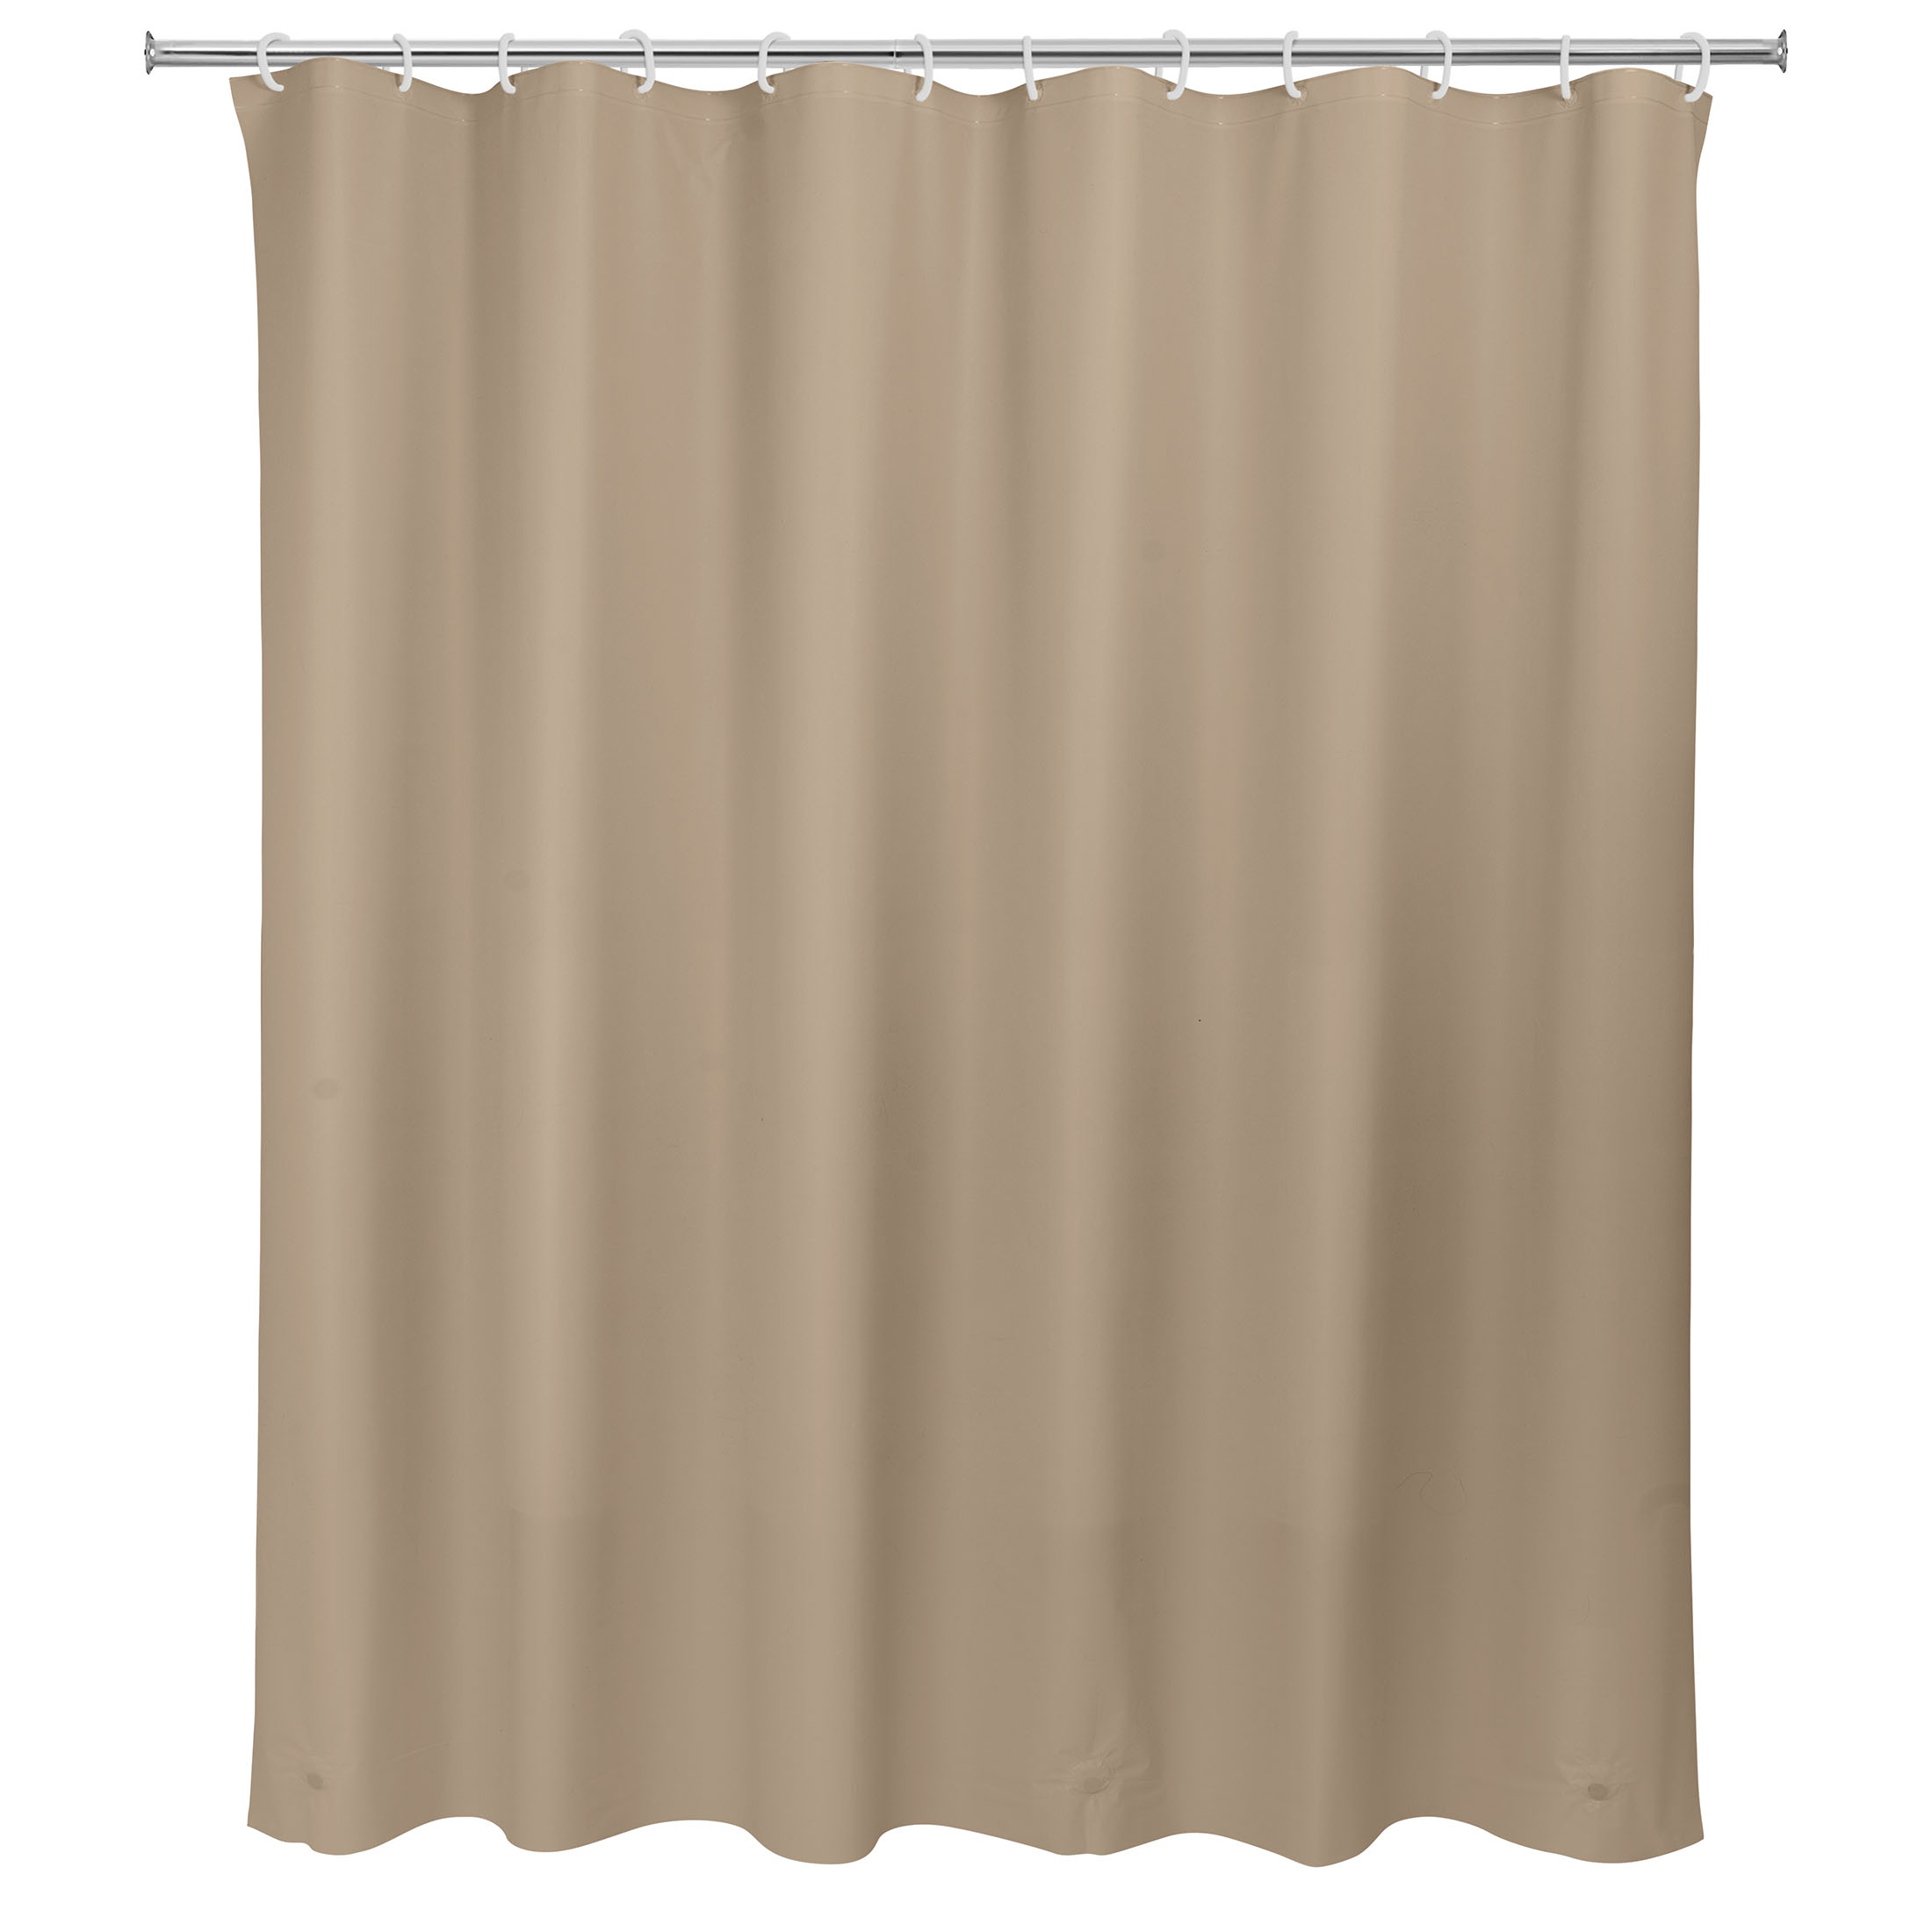 Light Weight PEVA Shower Curtain Liner, Weighted Magnetic Hem, Brown, 70" x 71", Mainstays - image 2 of 7